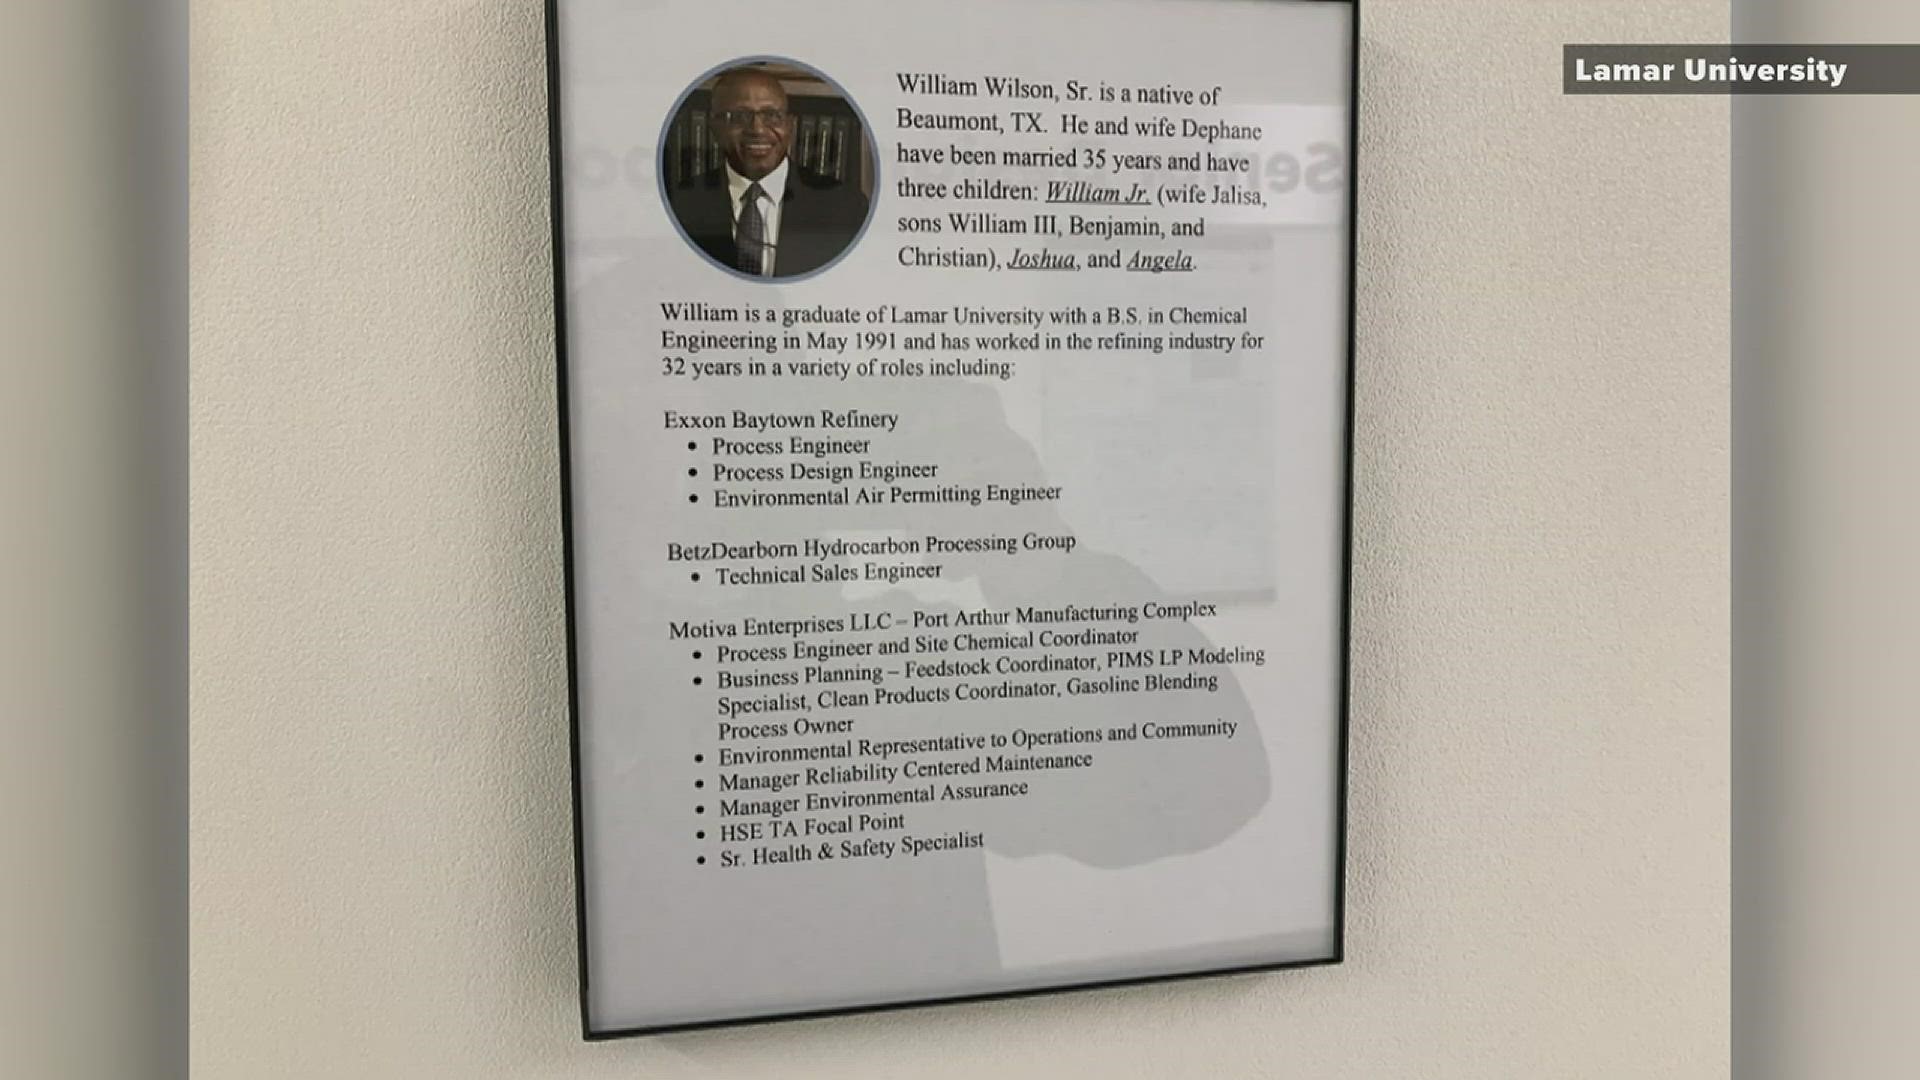 The National Society of Black Engineers put on a display. Students said it serves as an inspiration and a reminder of those that came before them.